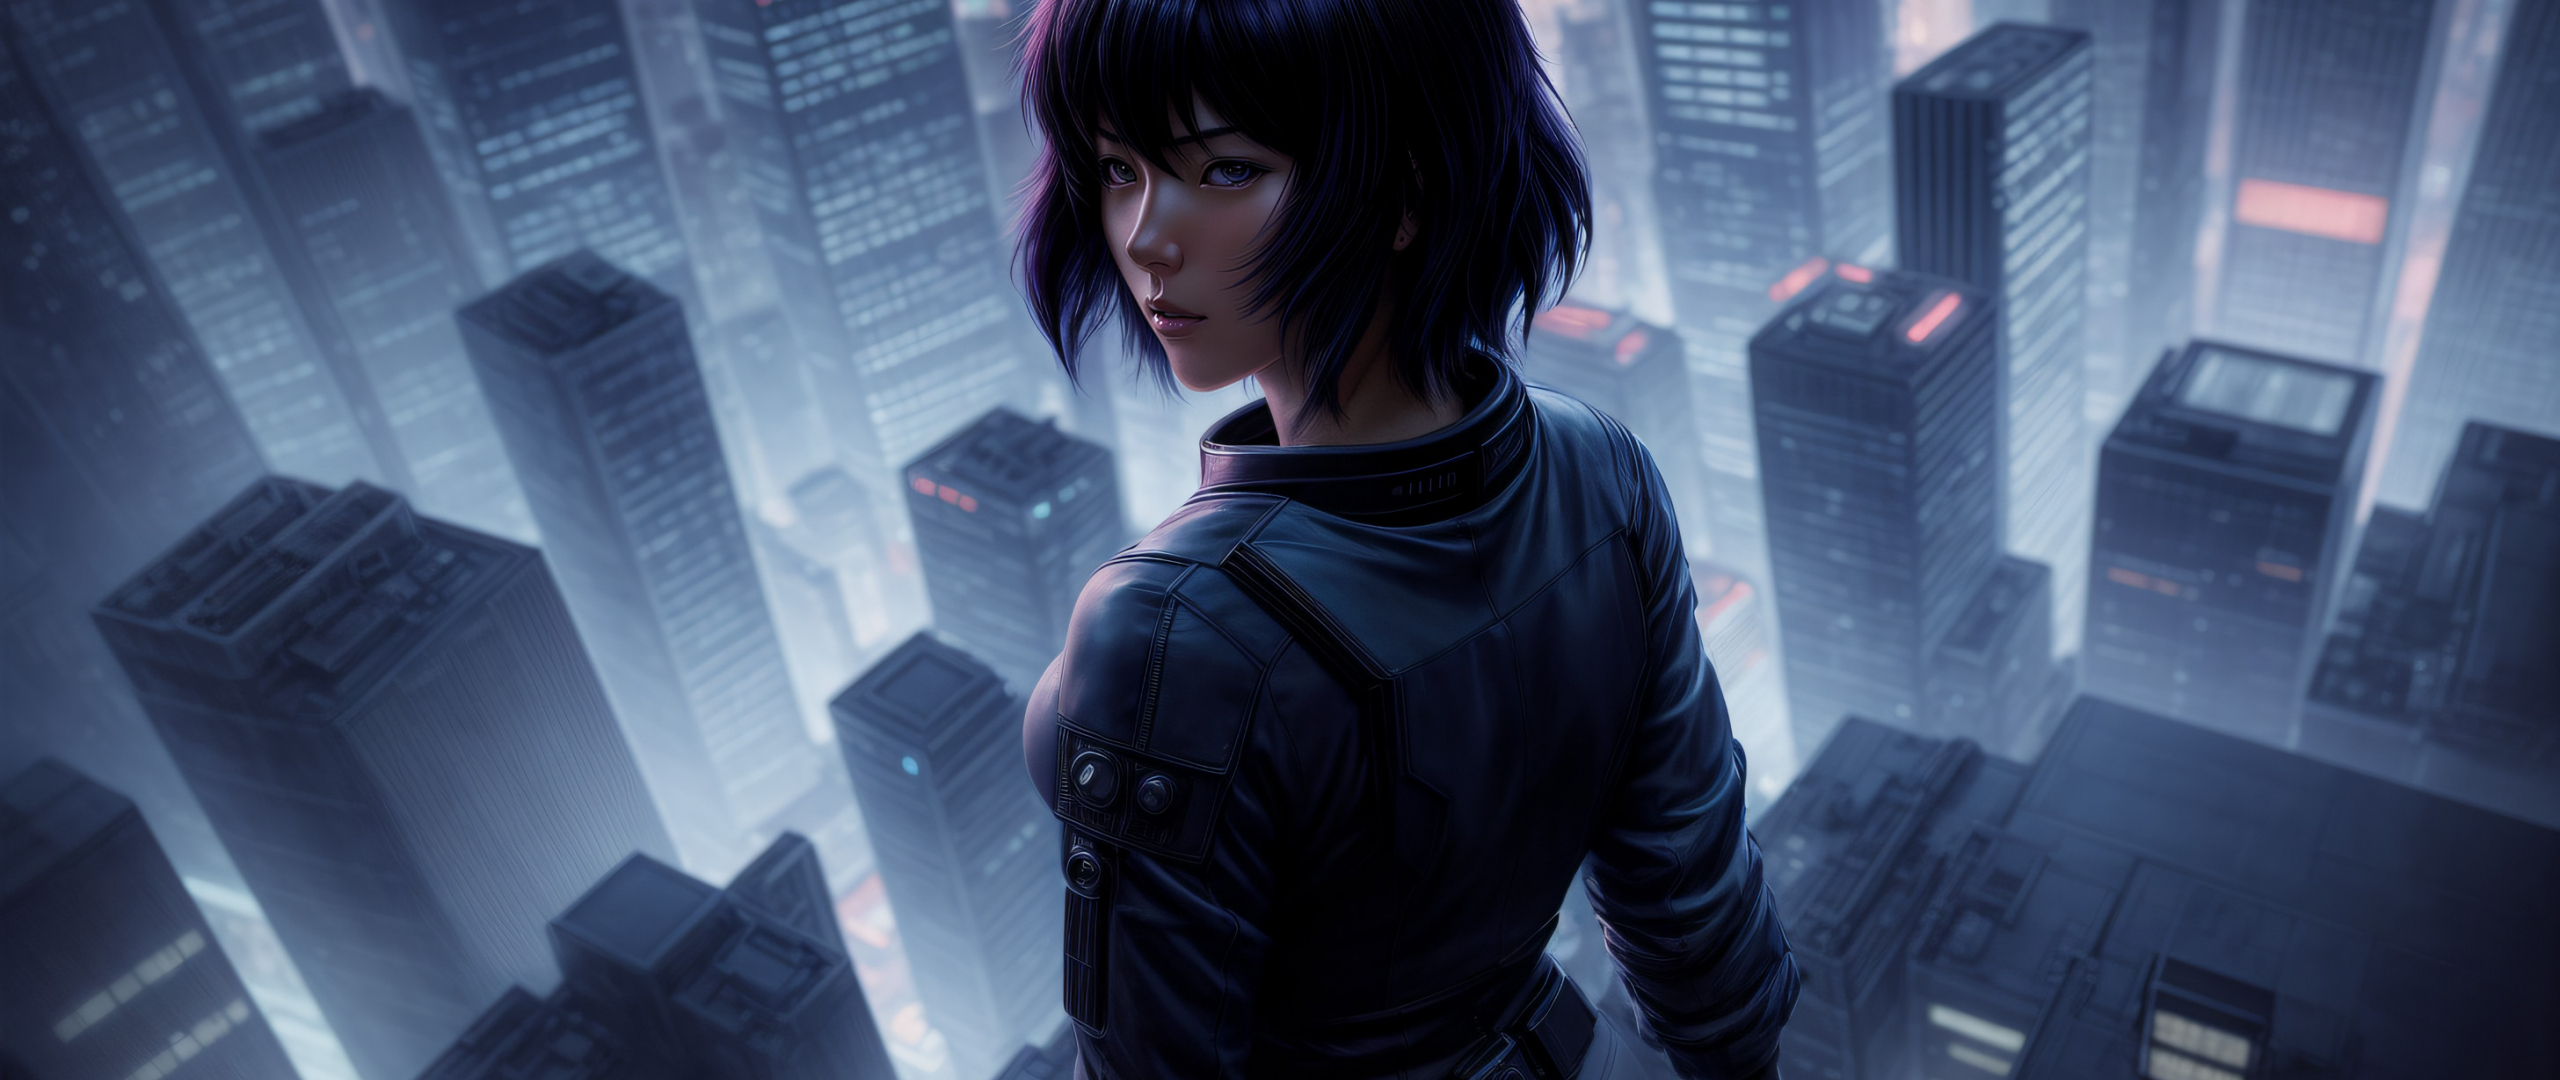 Beautiful girl, Ghost in the Shell, anime art, 2560x1080 wallpaper